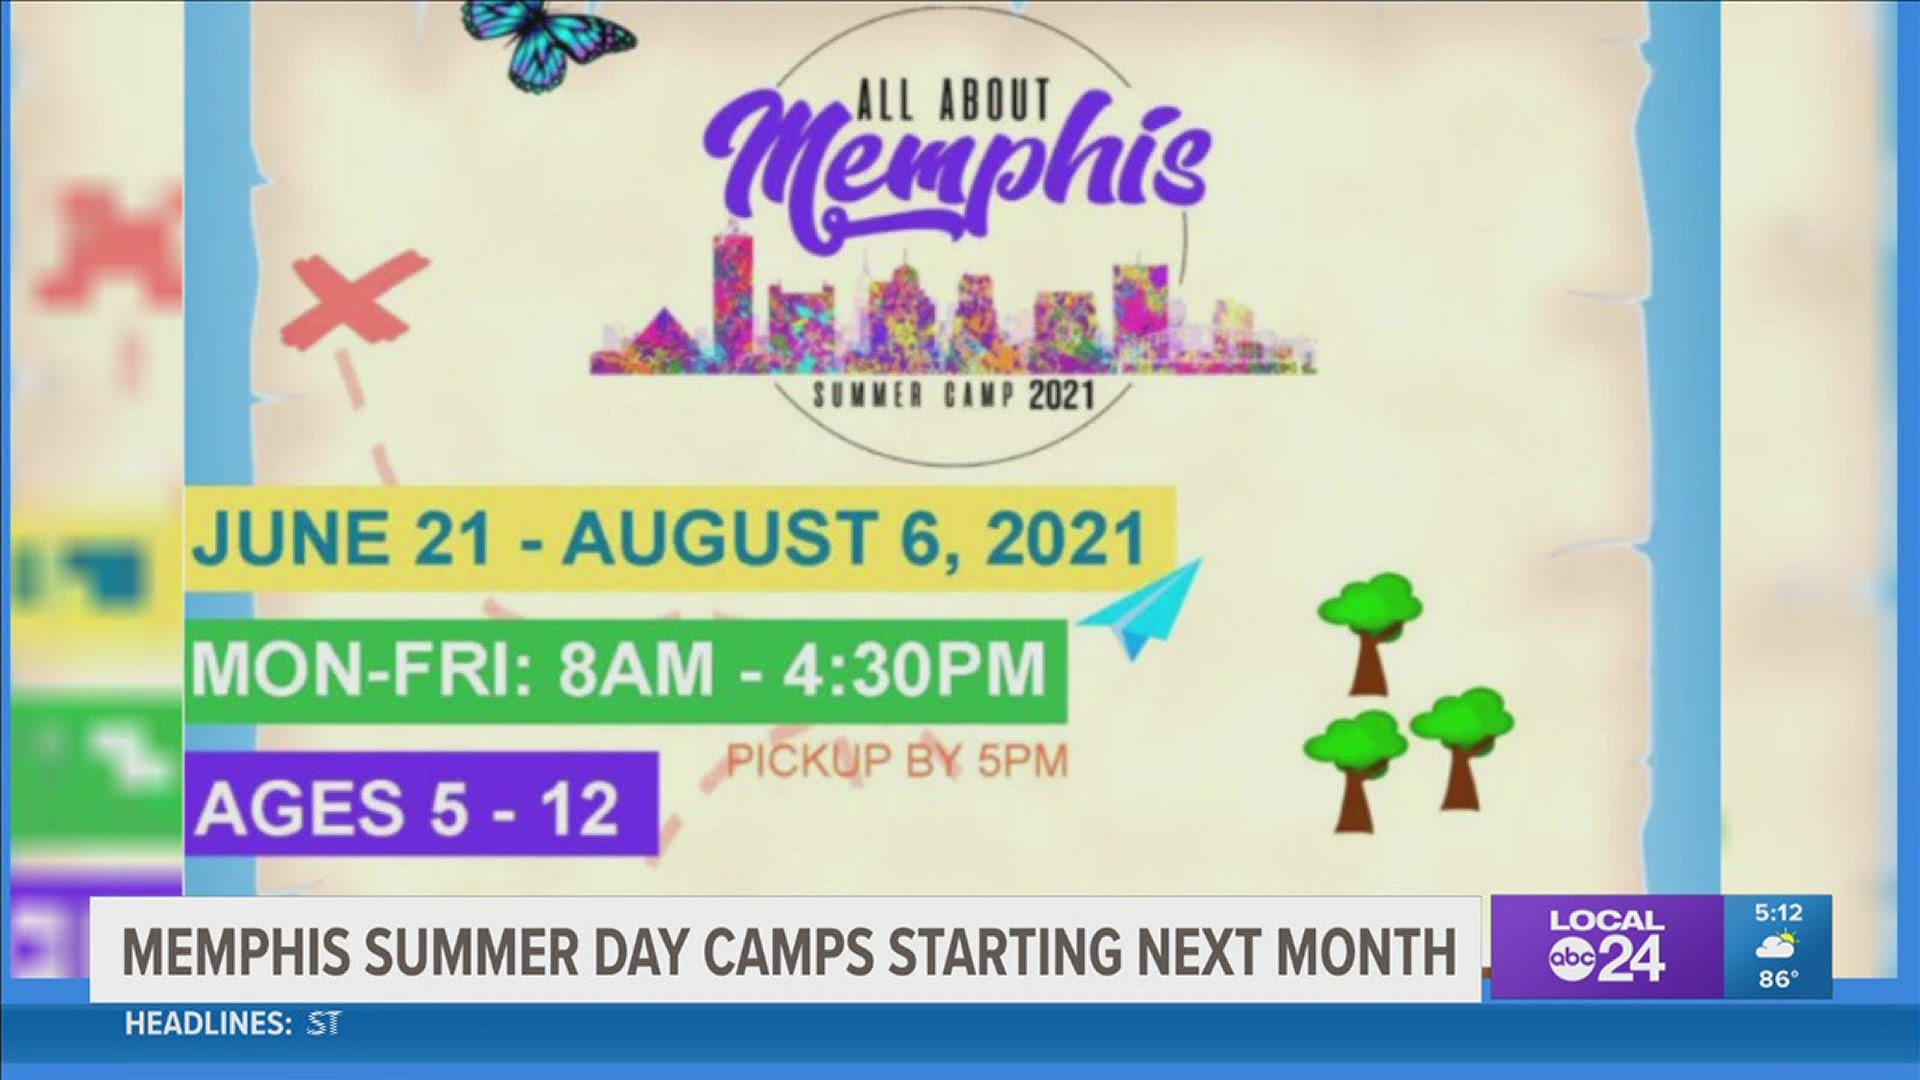 Register for City of Memphis summer camps